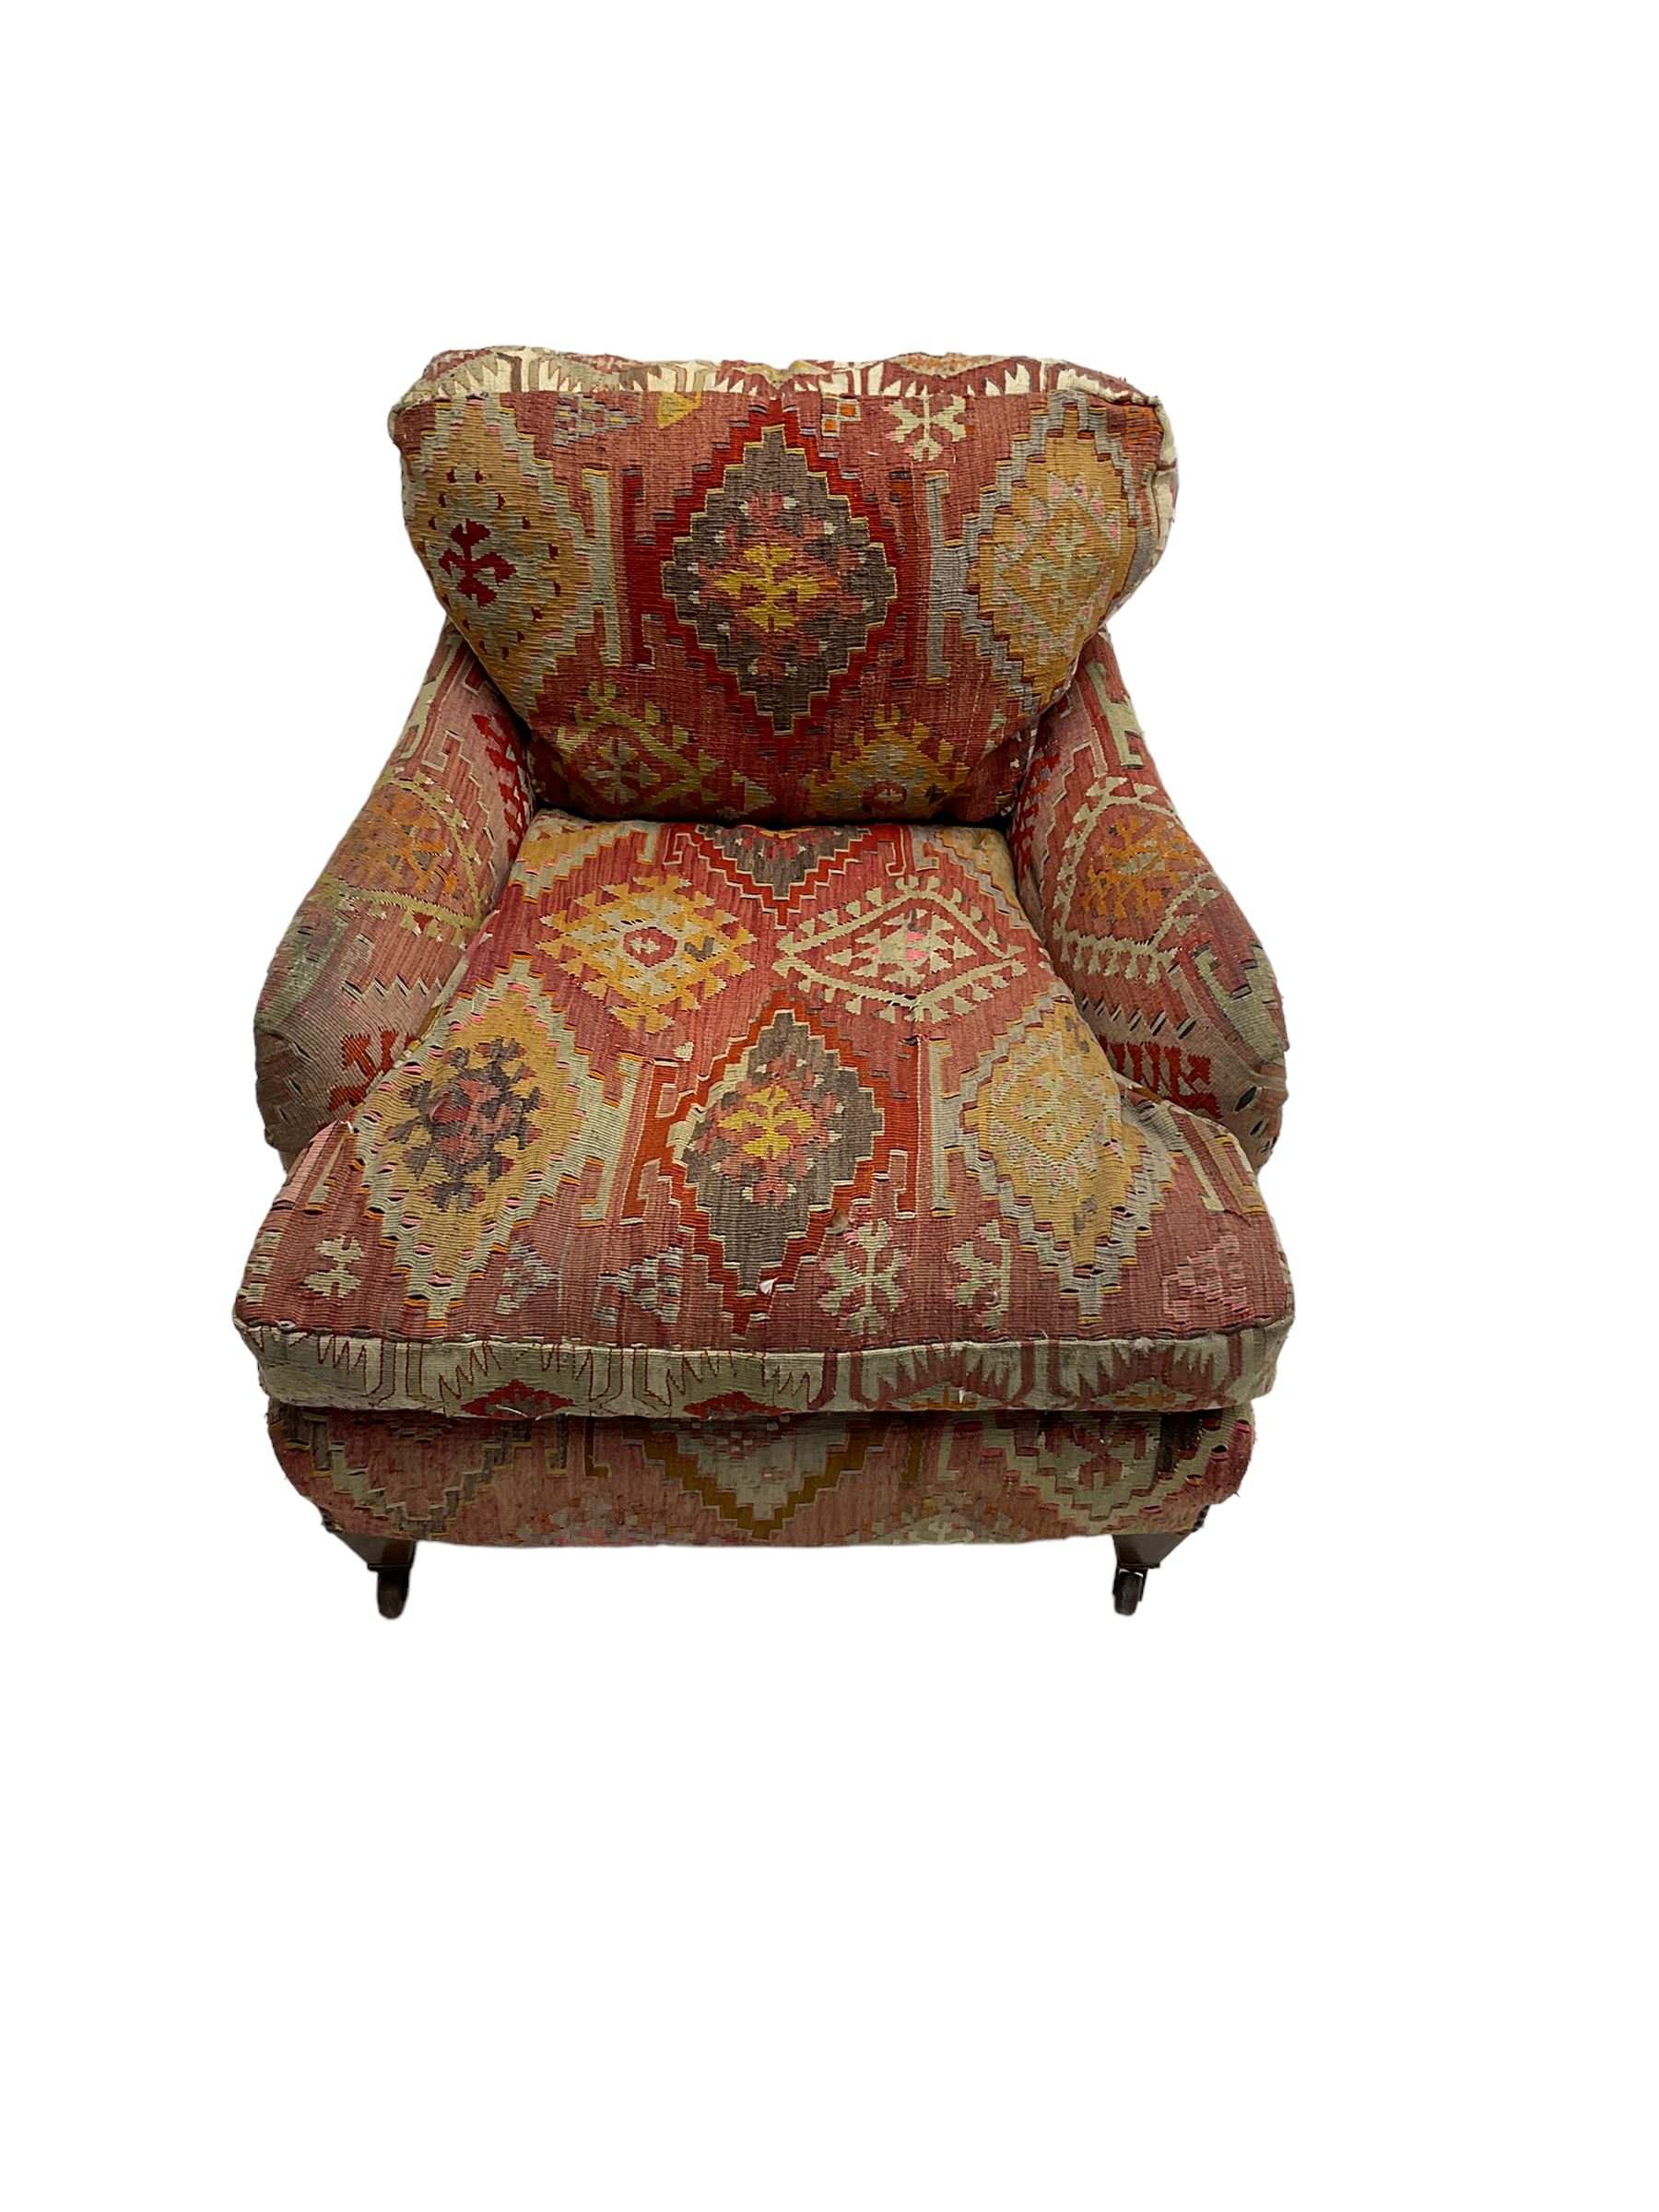 Early 20th century Howard style armchair - Image 2 of 5